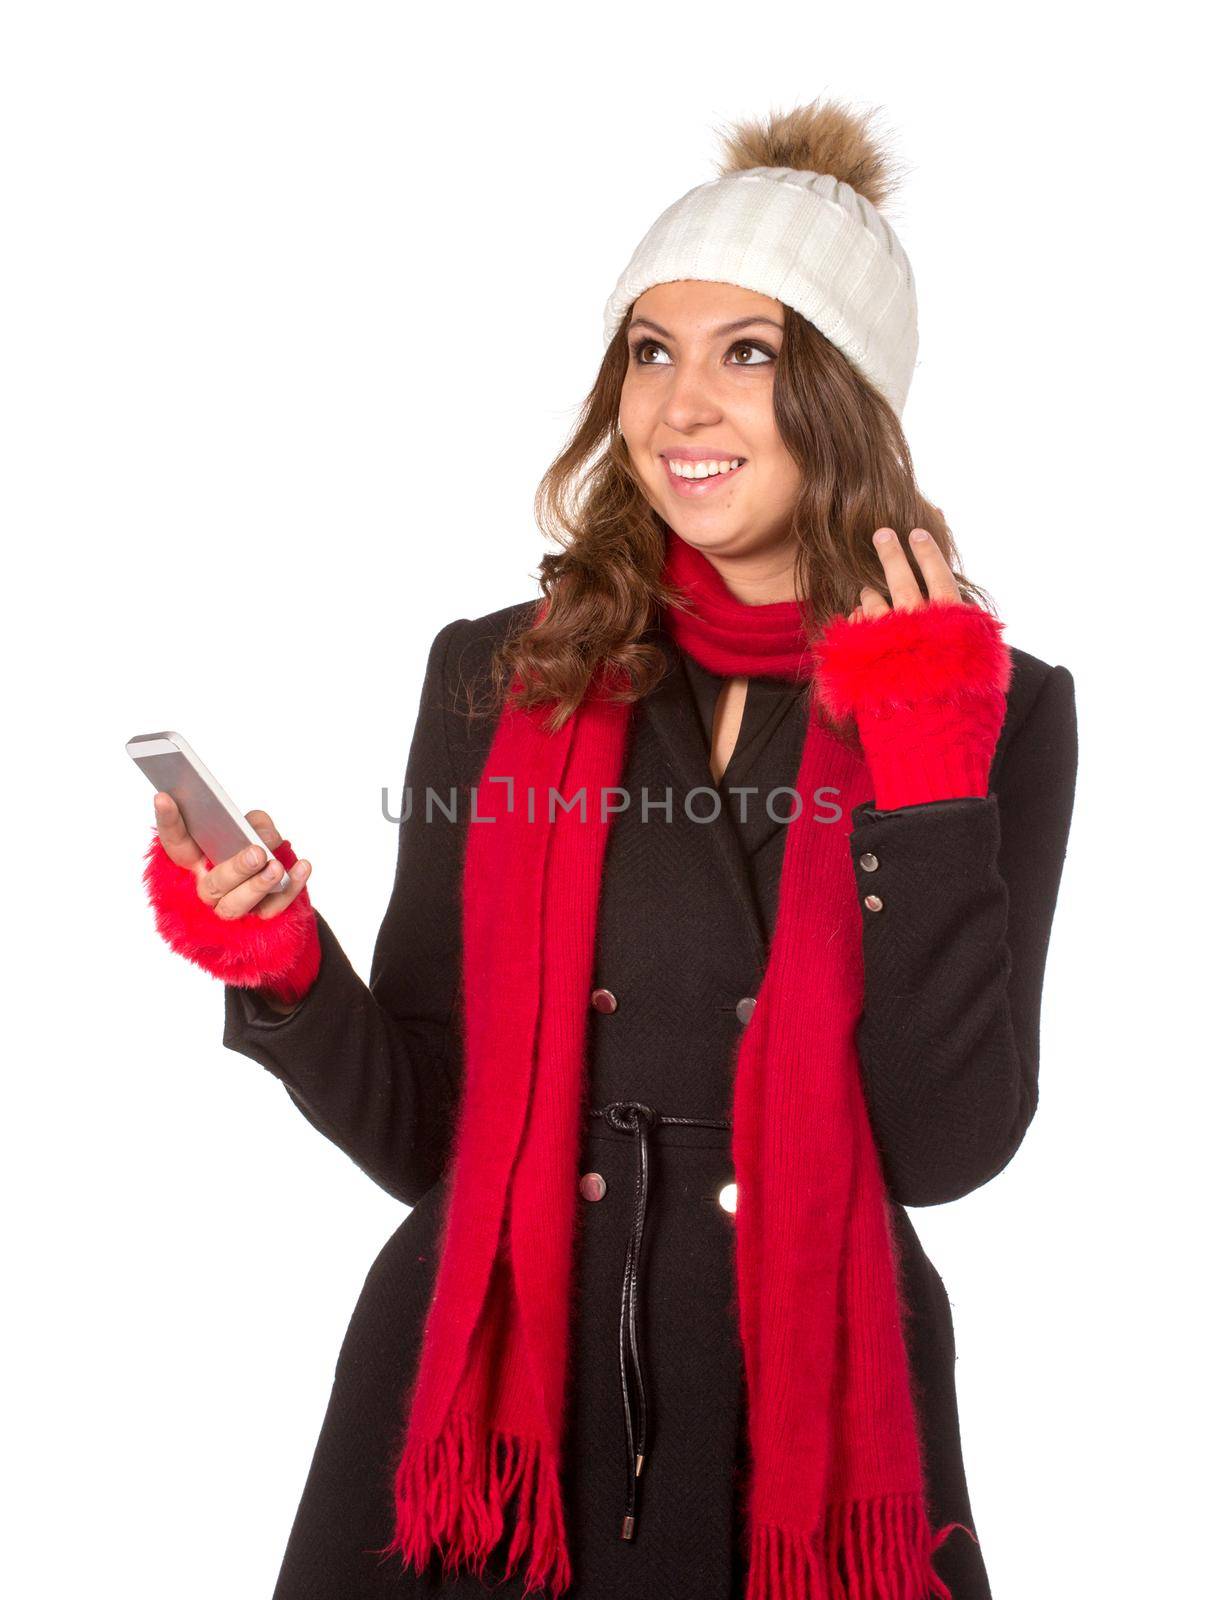 Sexual girl in warm hat and coat by gsdonlin